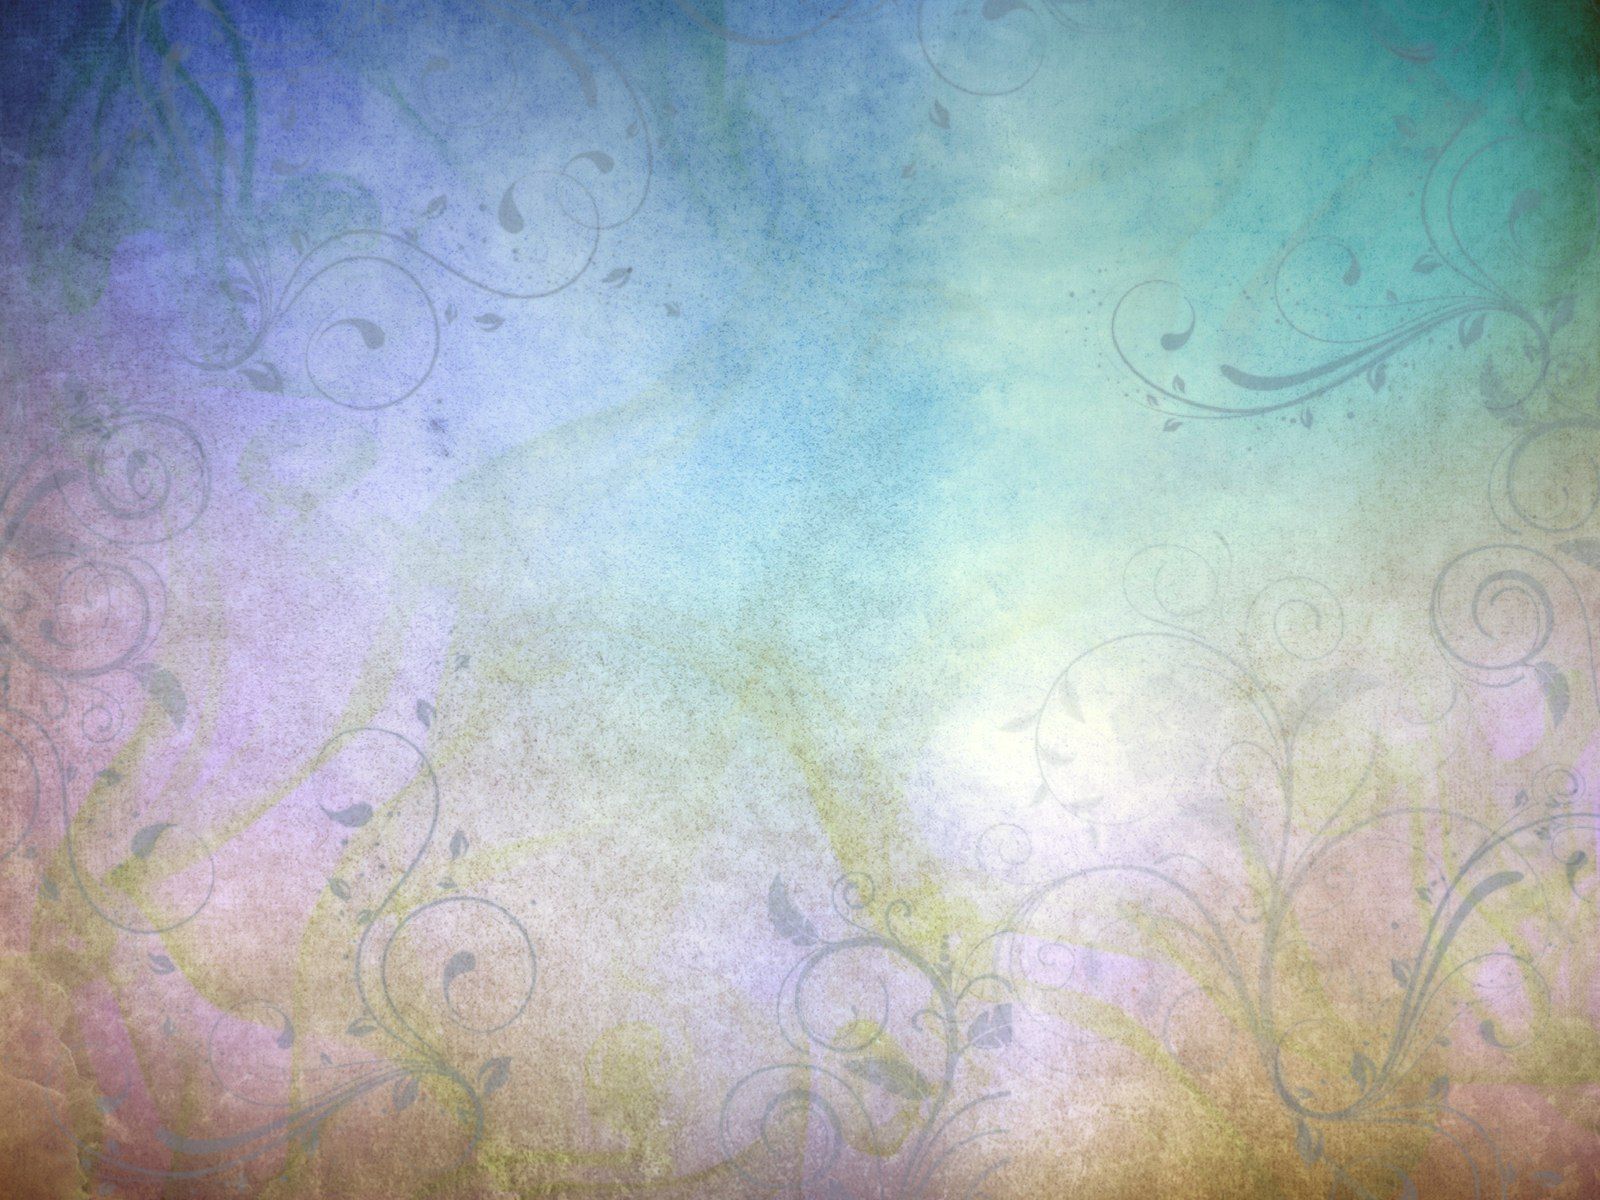 Ppt background vintage texture abstract backgrounds - (#39770 ...